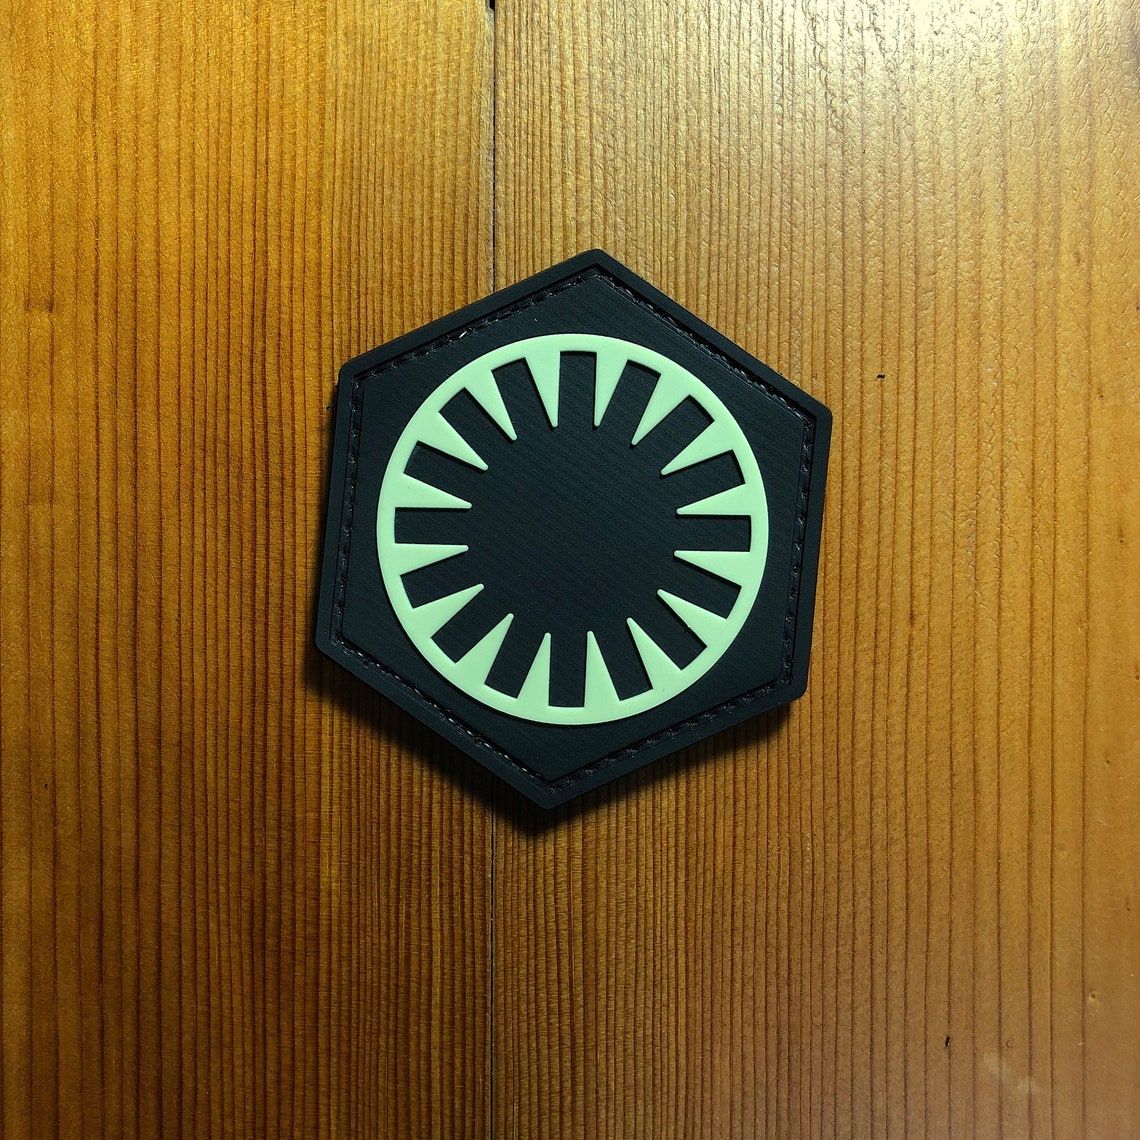 Pvc FIRST ORDER Insignia Fighter Star Wars Han Solo Rebel Scum | Etsy